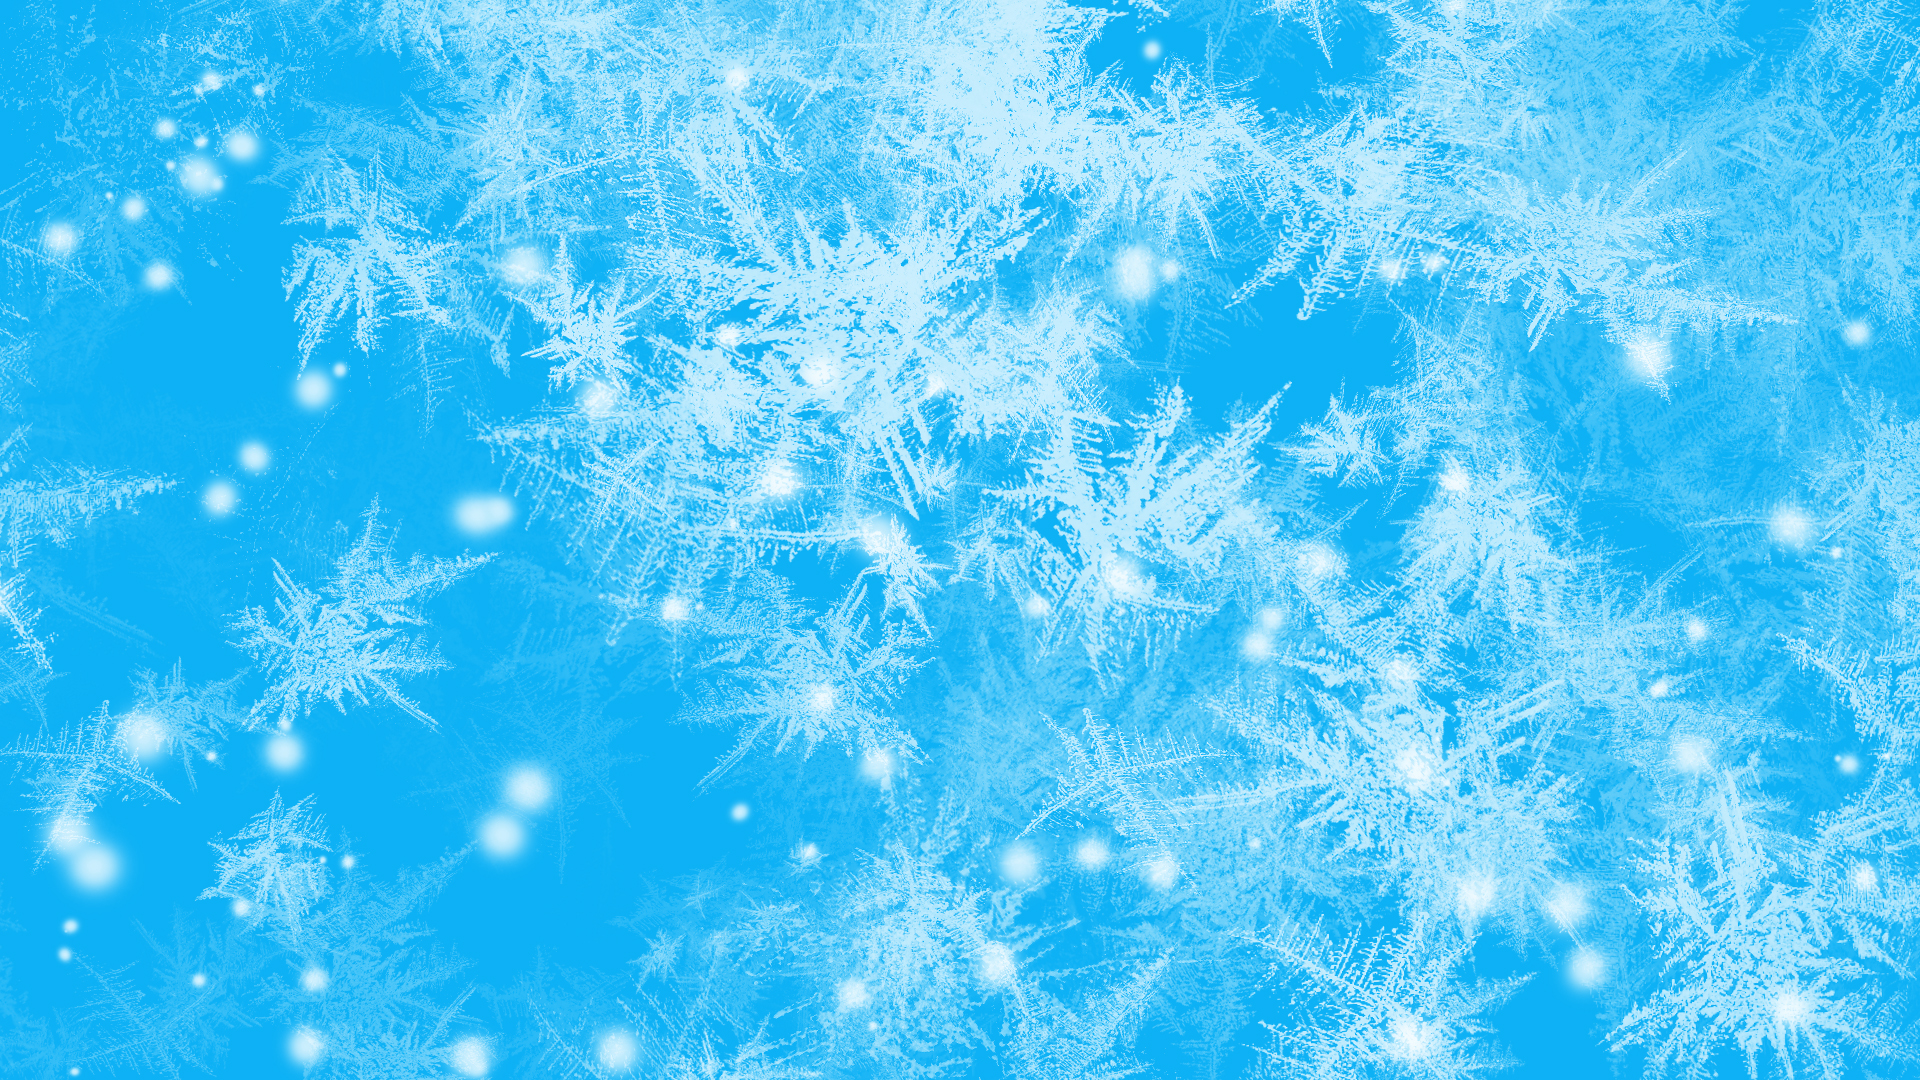 Abstract Blue Digital Art Frost Snowflake 1920x1080